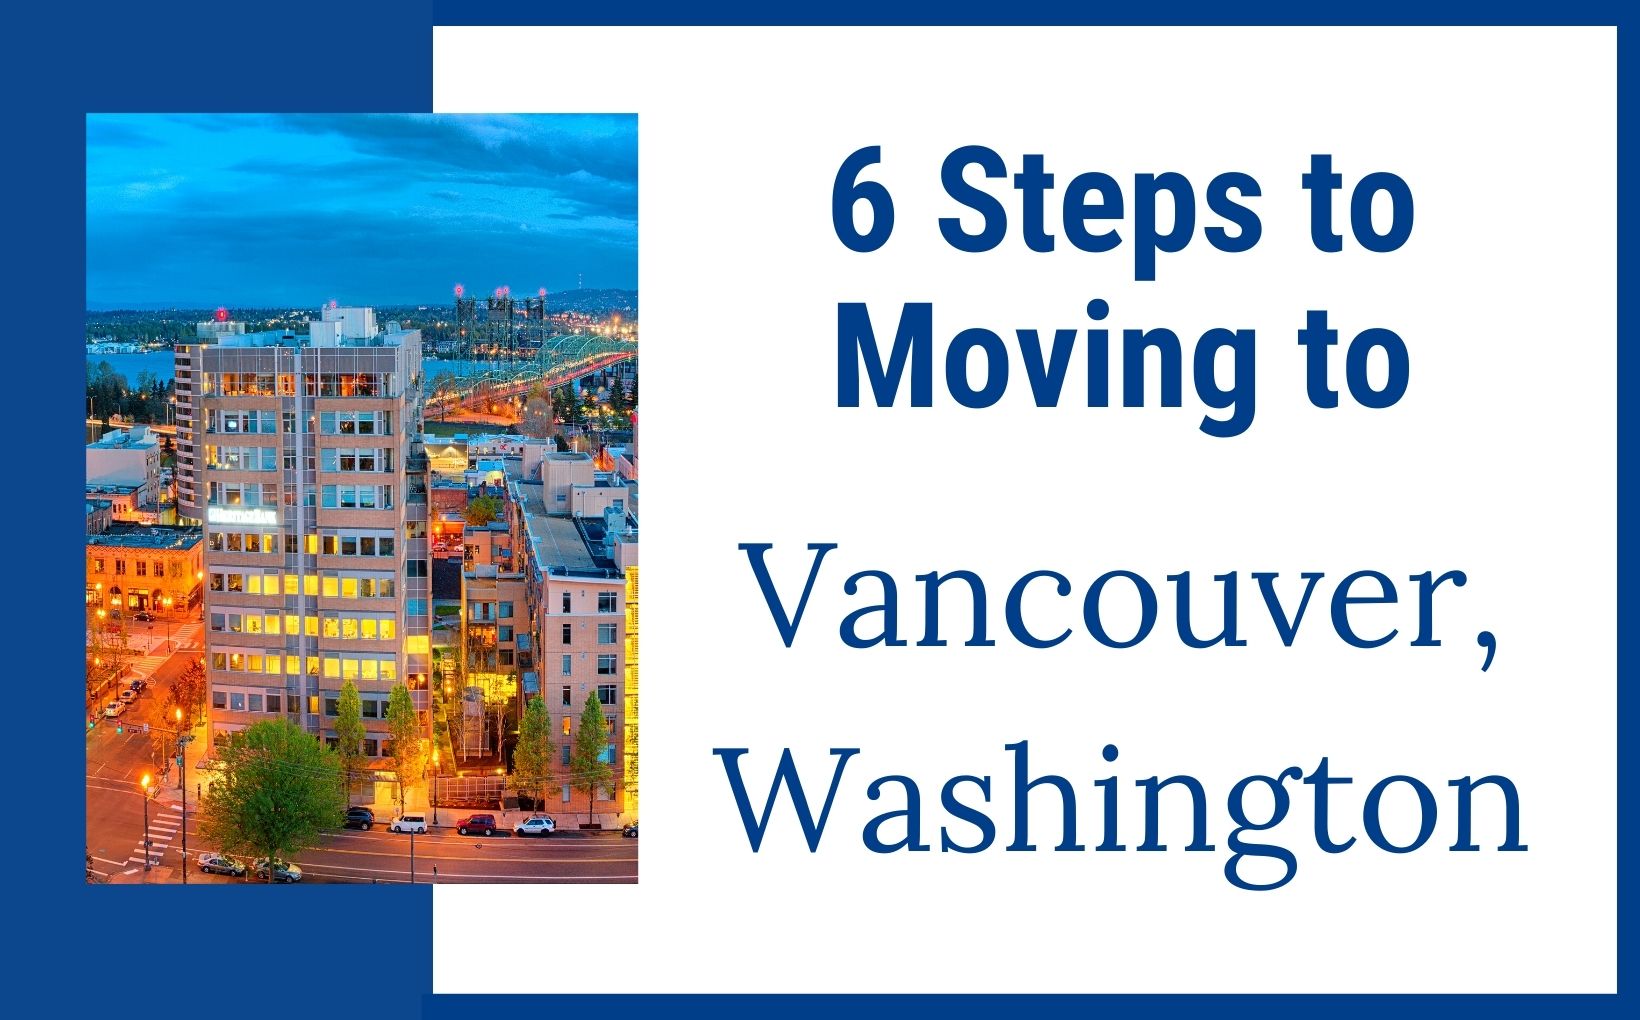 6 steps to moving to Vancouver Washington feature image